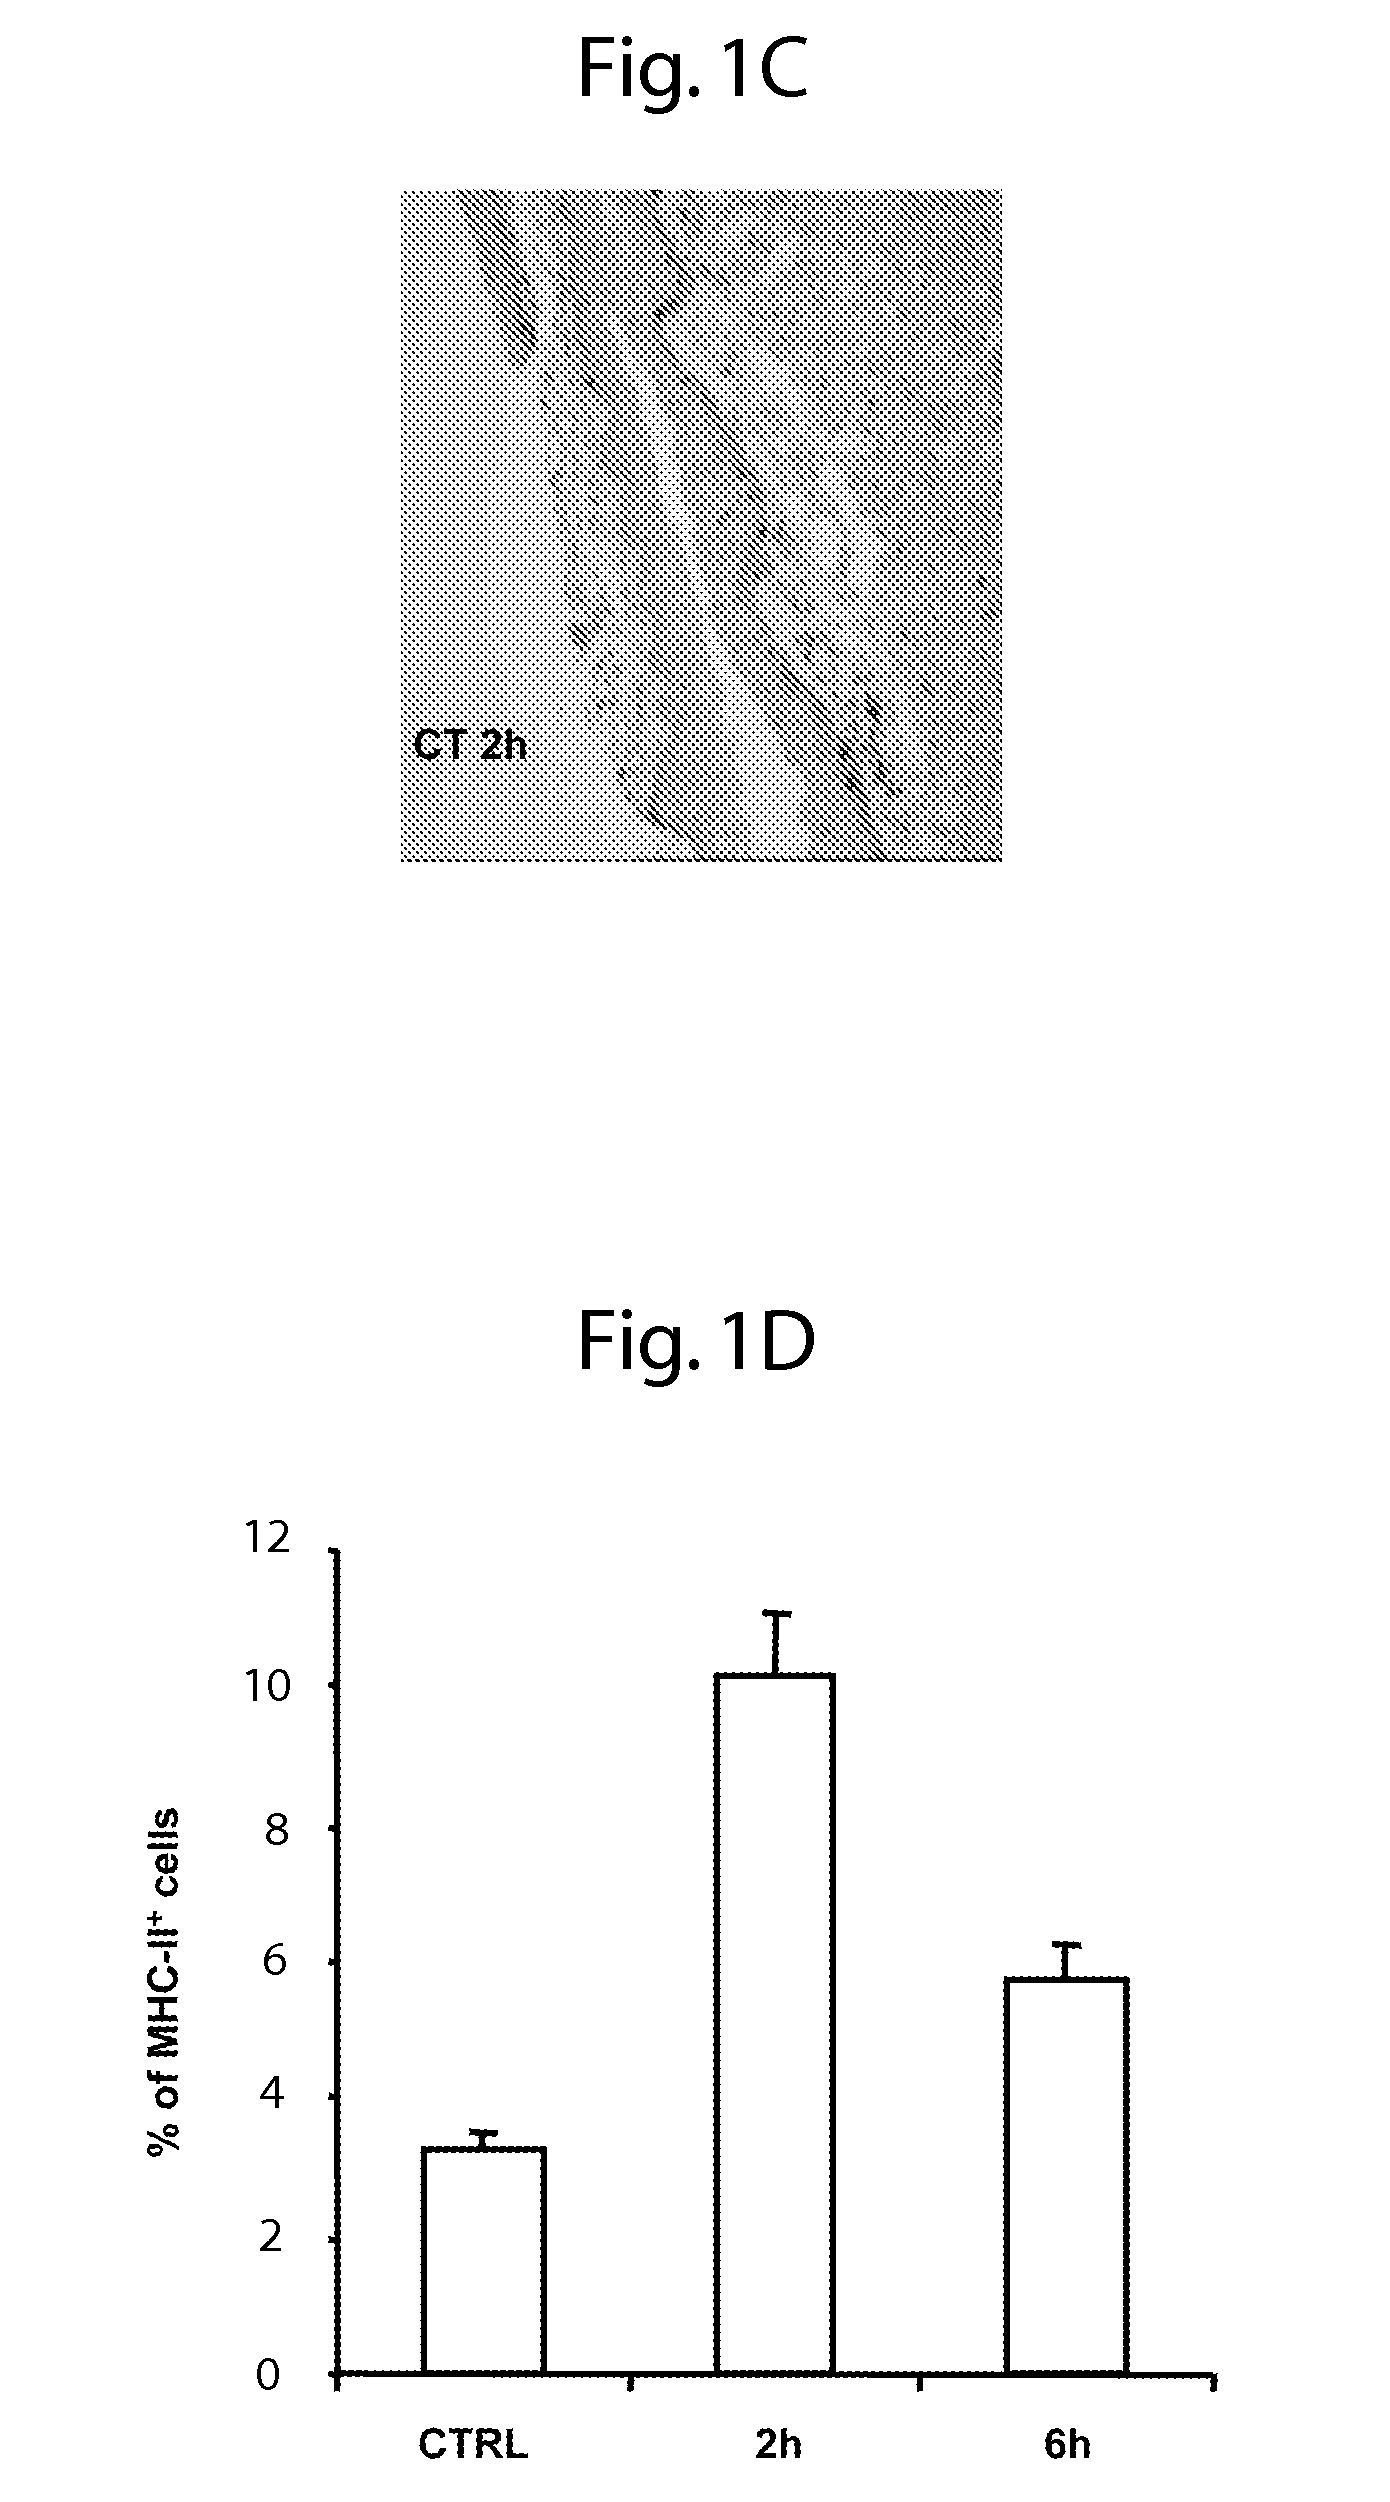 Method for inducing mucosal humoral and cell-mediated immune responses by sublingual administration of antigens